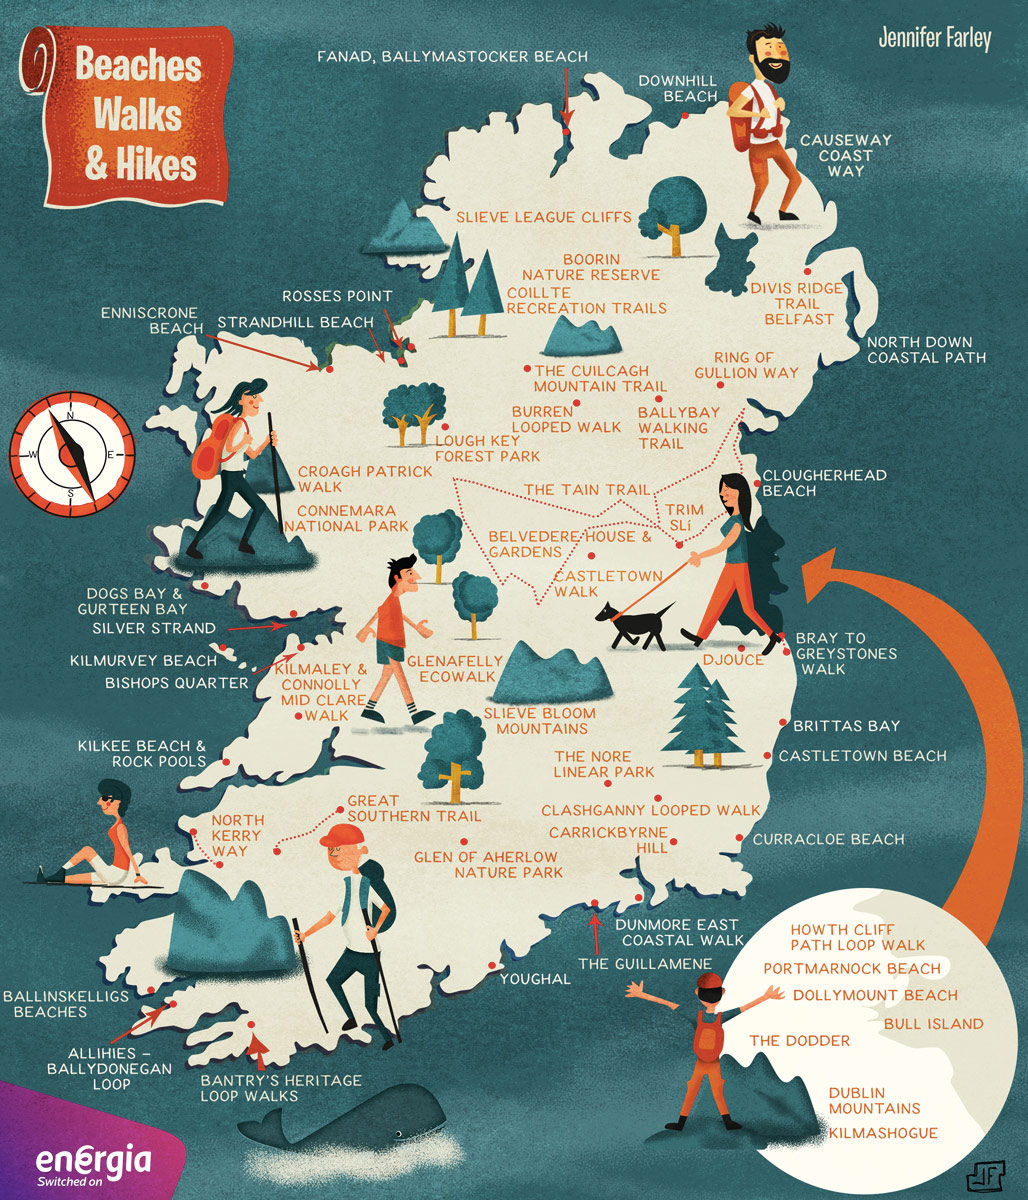 Hikes Walks Beaches in Ireland Map illustrated by Jennifer-Farley